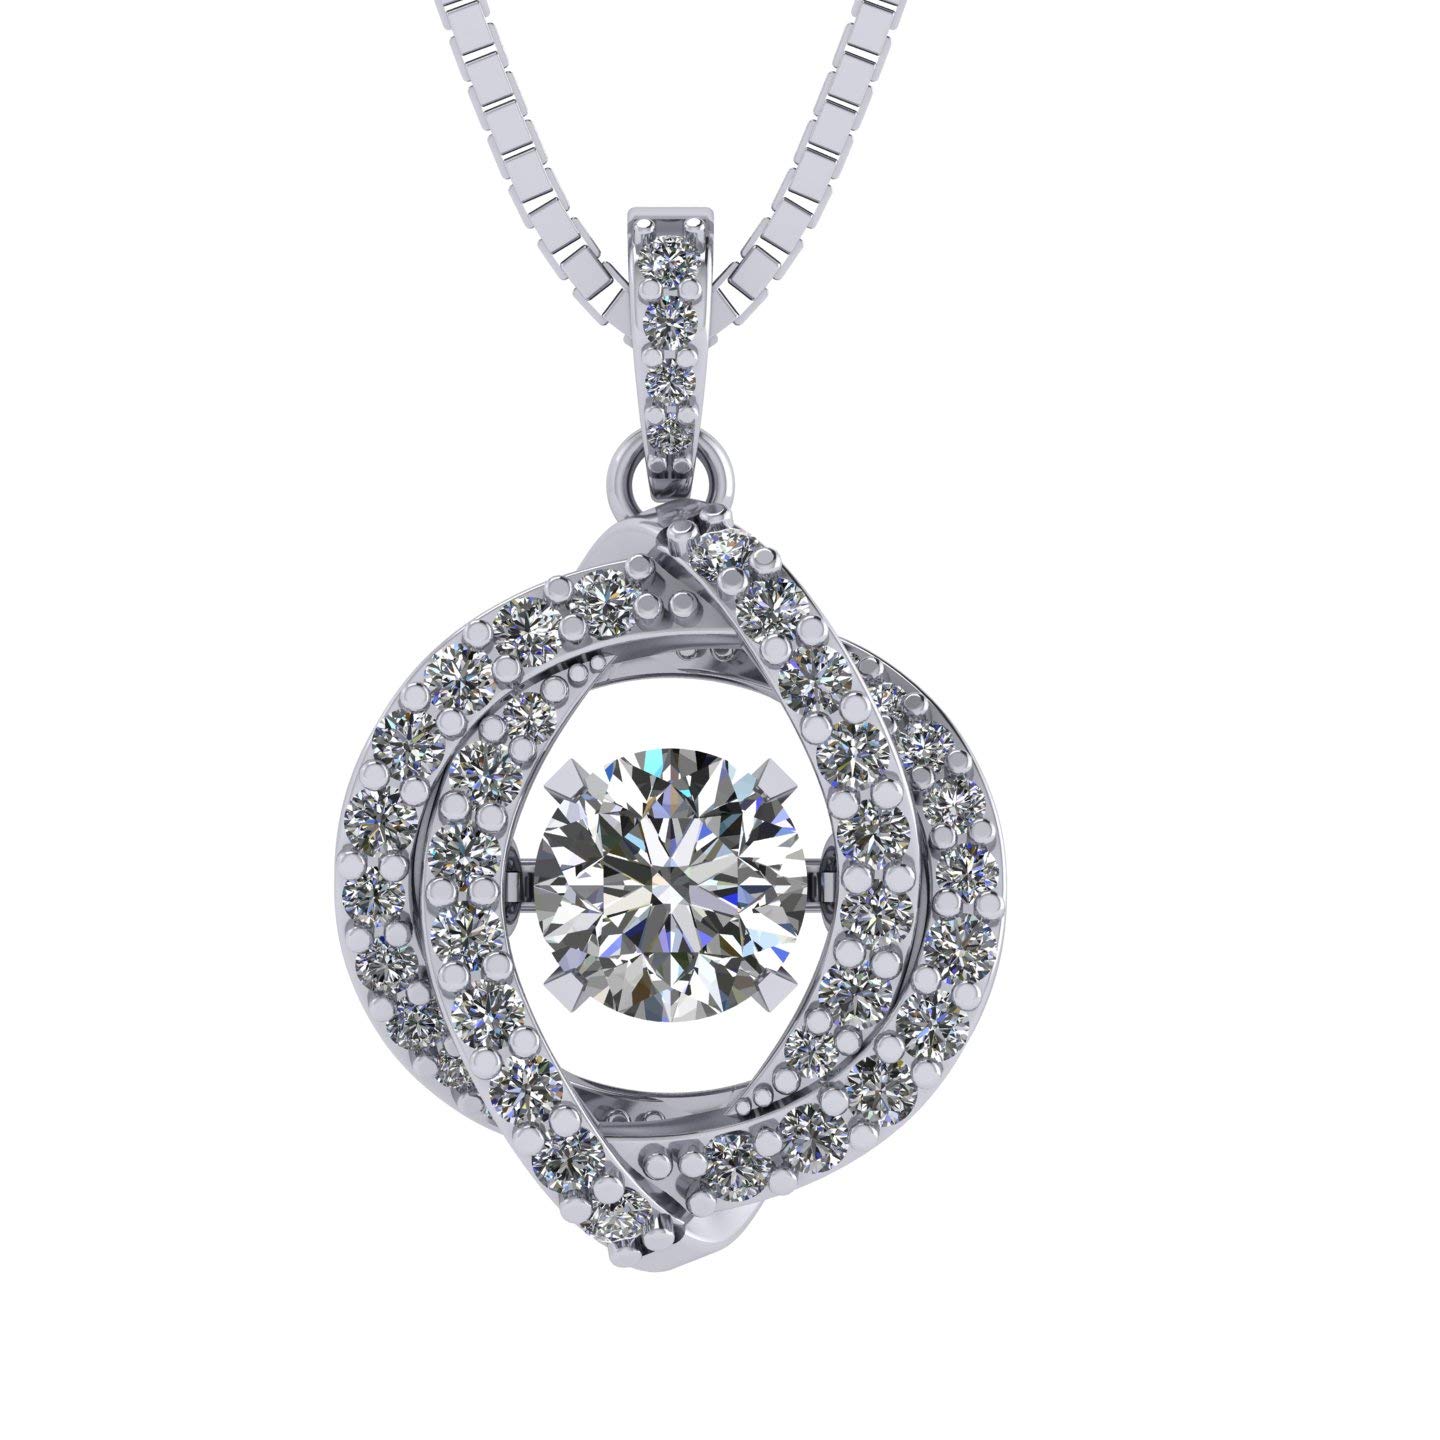 Dancing Diamonds in Motion 14kt Gold Diamond Pendant Necklace with 0.09  Carats t.w - Jewelry Factory - North Hollywood, CA